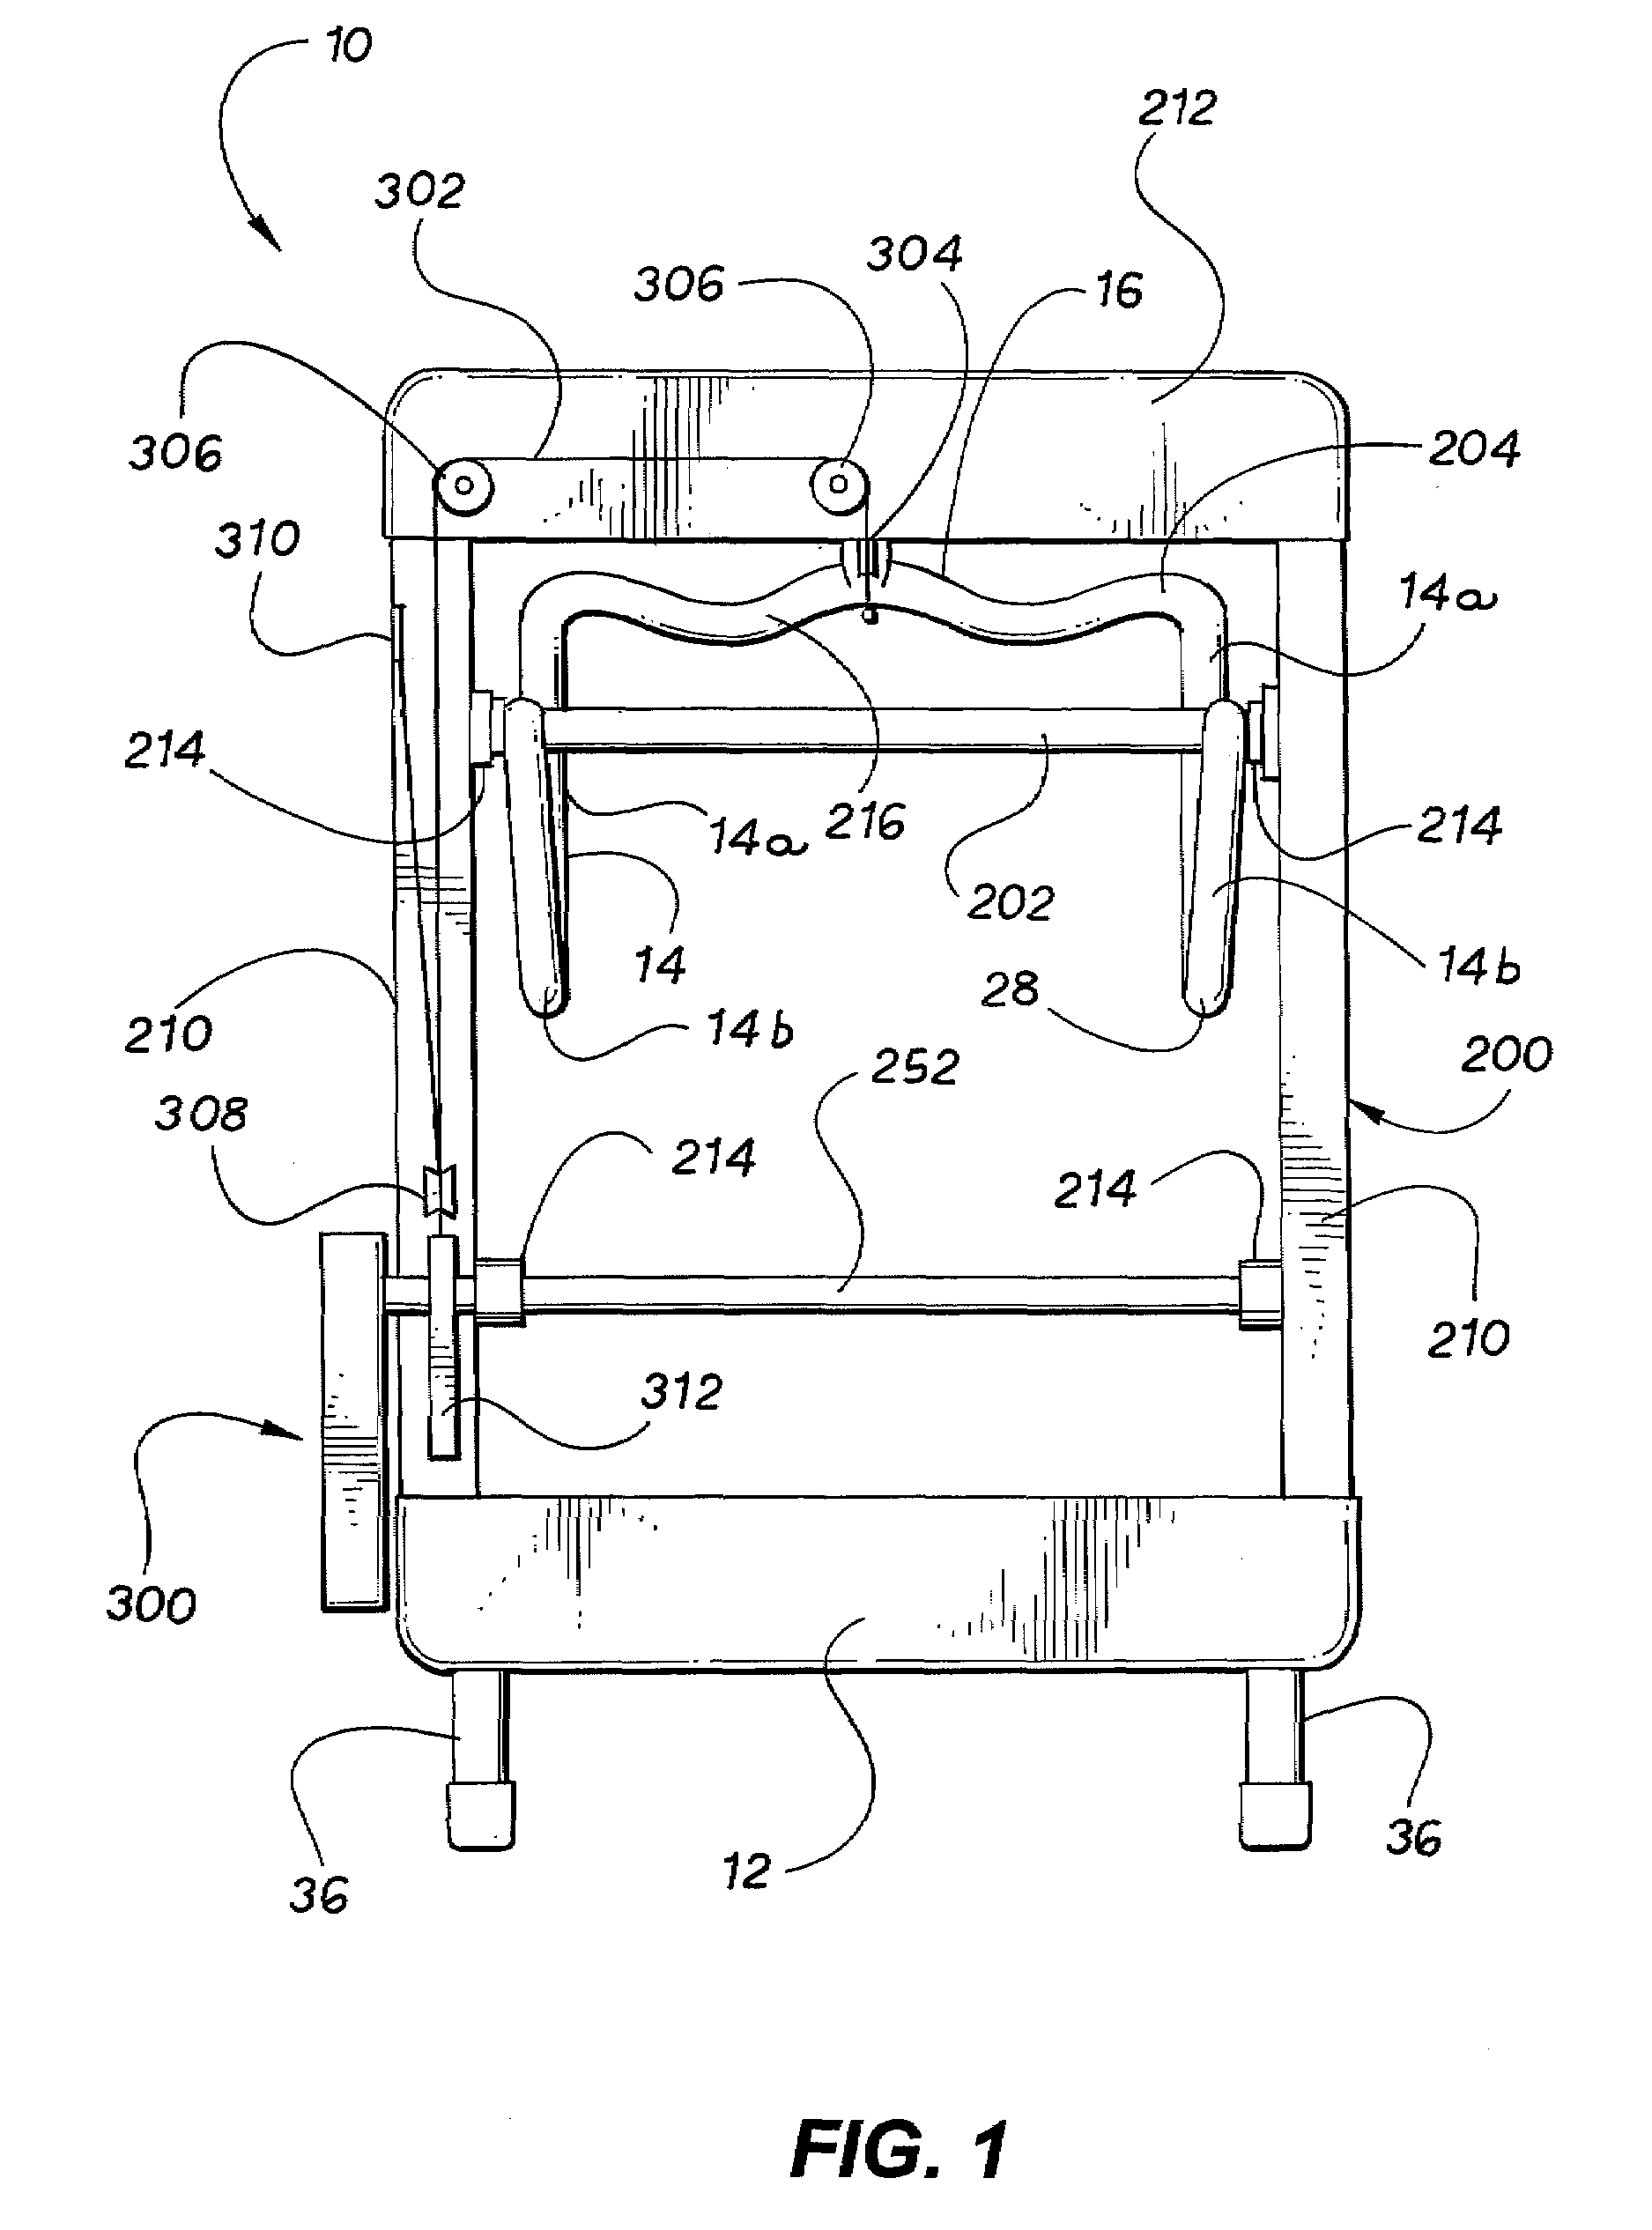 Dual direction exercise treadmill for simulating a dragging or pulling action with a user adjustable constant static weight resistance